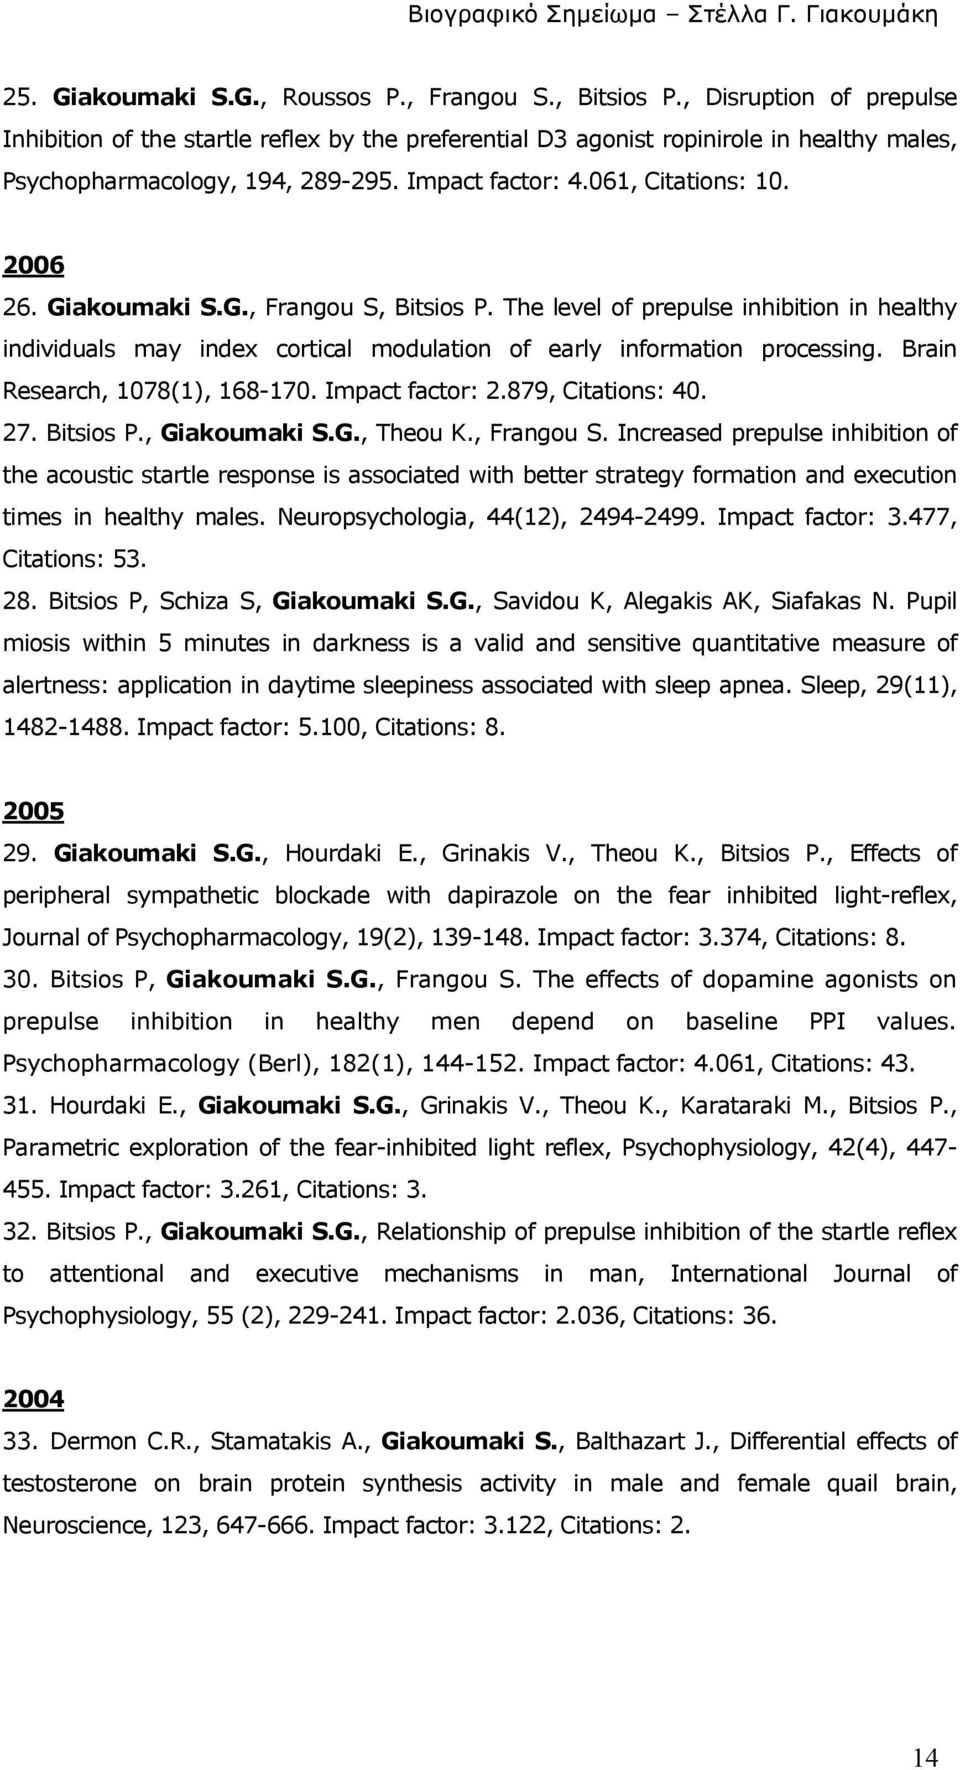 Giakoumaki S.G., Frangou S, Bitsios P. The level of prepulse inhibition in healthy individuals may index cortical modulation of early information processing. Brain Research, 1078(1), 168-170.